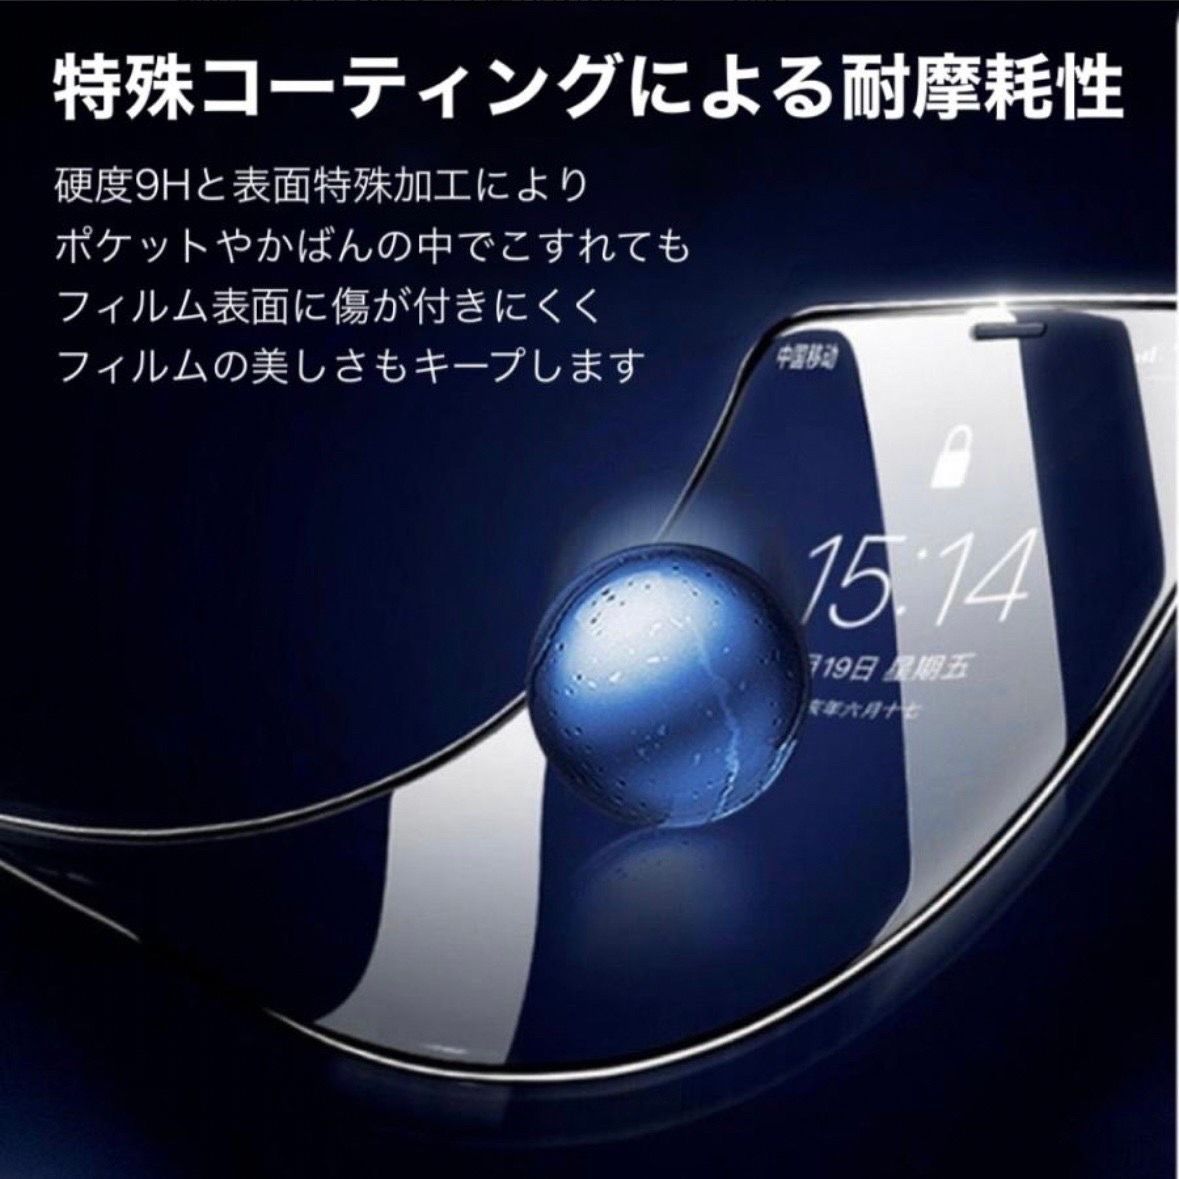 Android SAMSUNG GALAXYS23ｕｌｔｒａ専用☆ ギャラクシーS23ultra ...